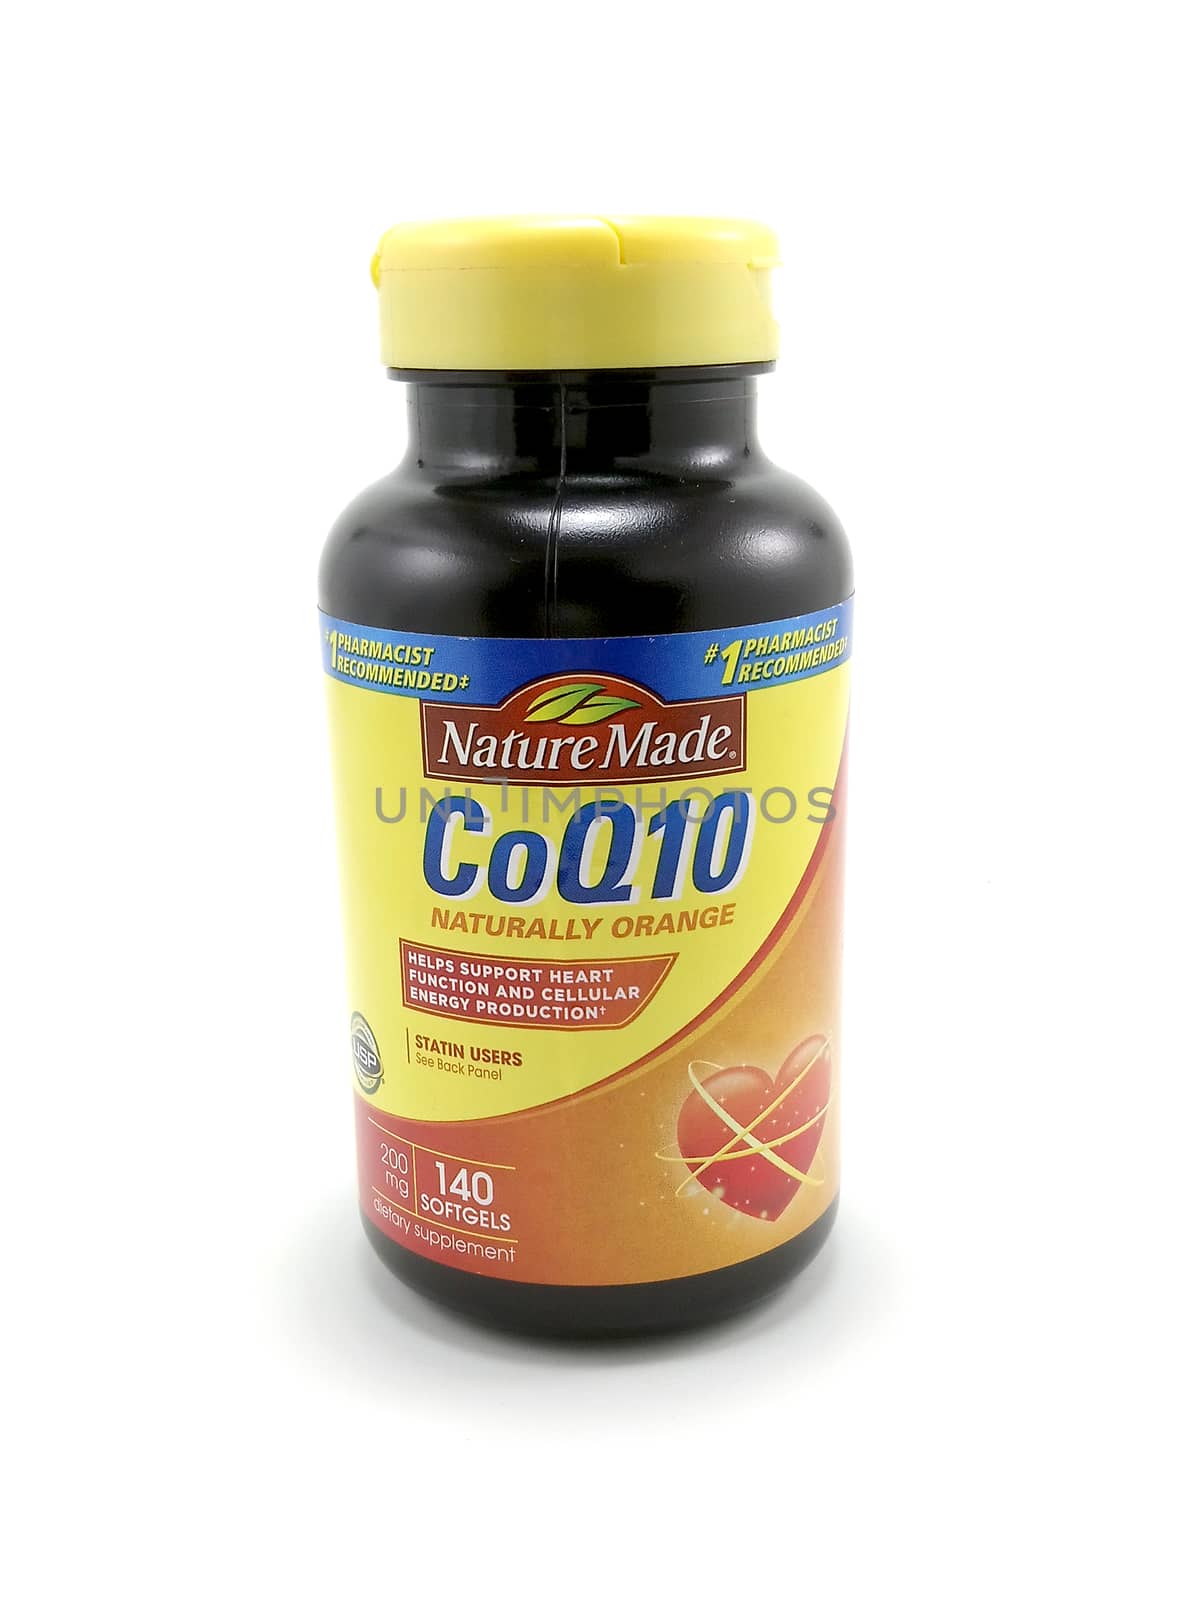 Natural made coq10 naturally orange bottle in Manila, Philippine by imwaltersy